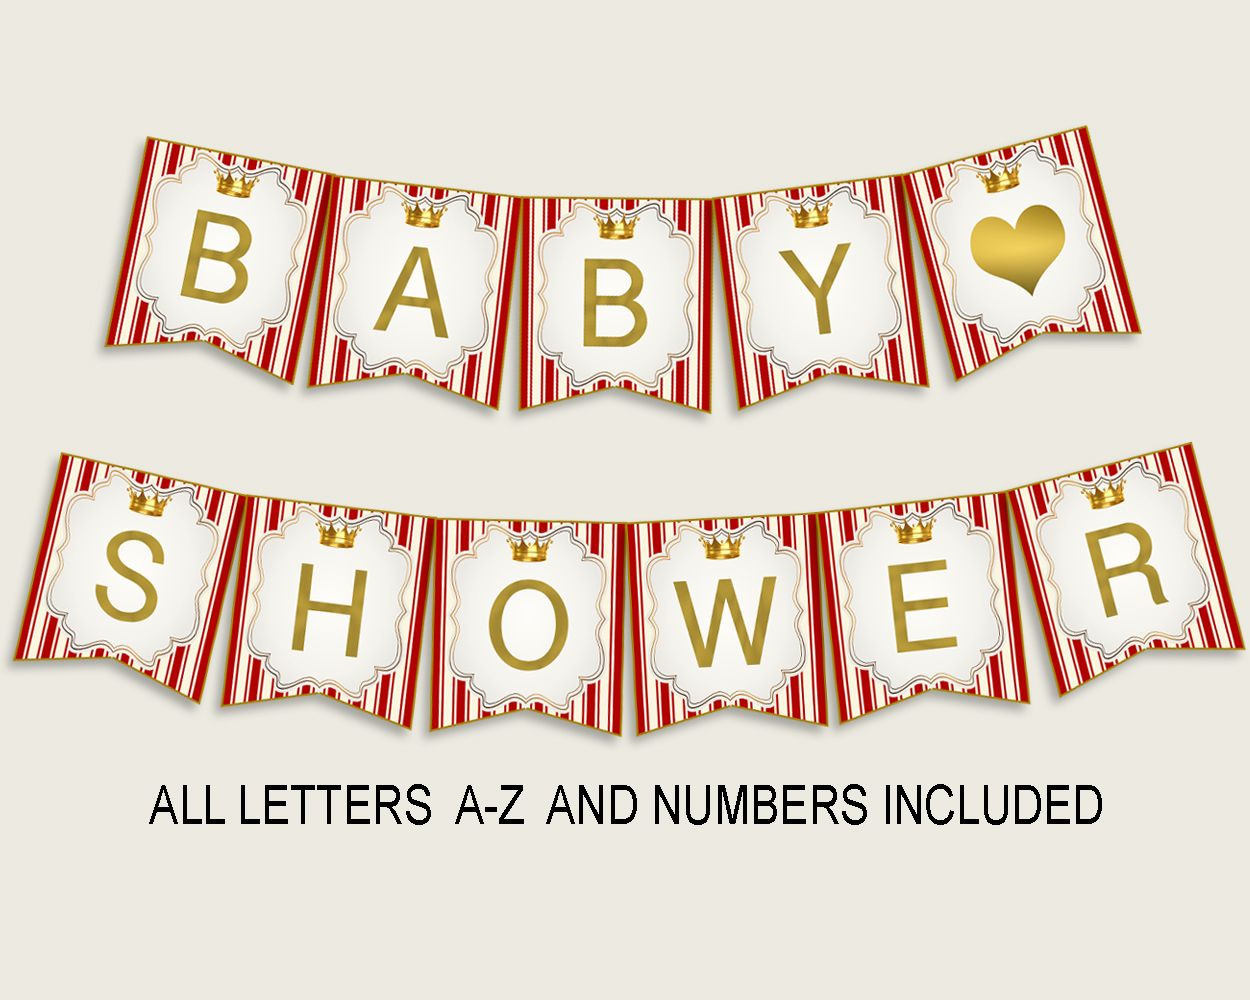 Full Size of Baby Shower:89+ Indulging Baby Shower Banner Picture Inspirations Baby Shower Banner Baby Shower Name Banners Best Of Banner Baby Shower Banner Prince Baby Shower Banner Red Gold